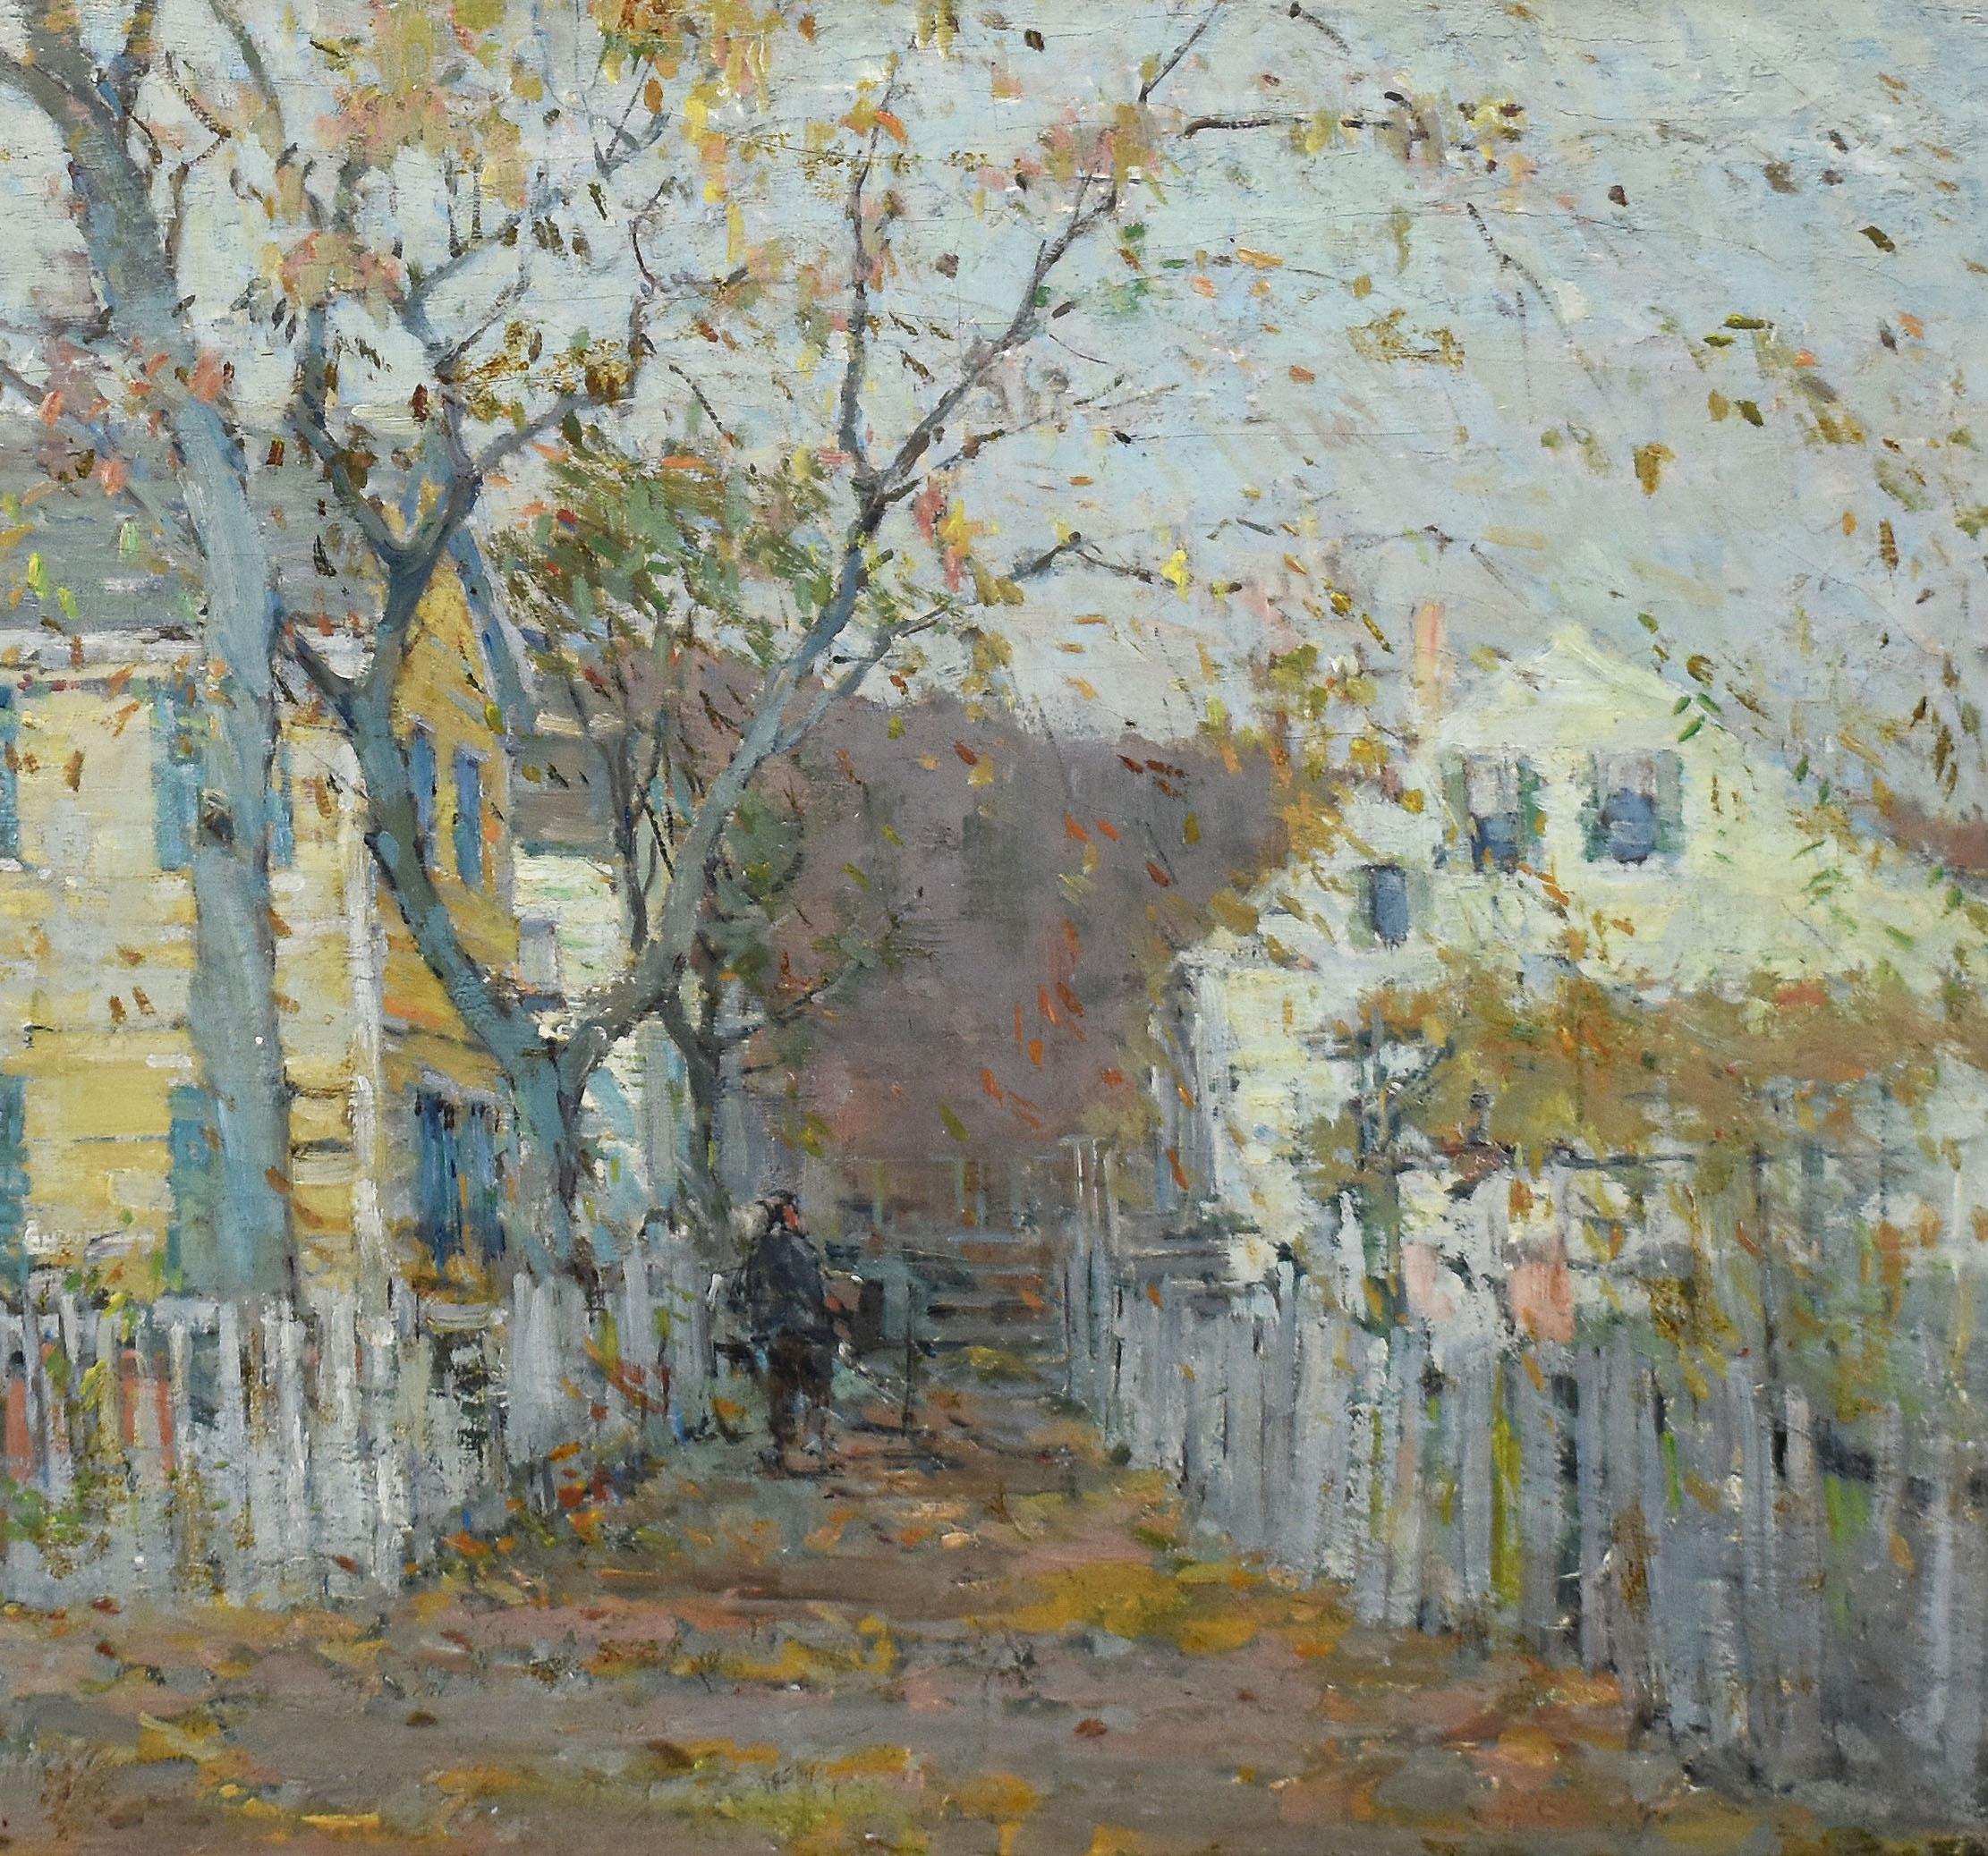 Antique American Impressionist Rockport Street Scene Large 1918 Oil Painting - Brown Figurative Painting by Harry Aiken Vincent